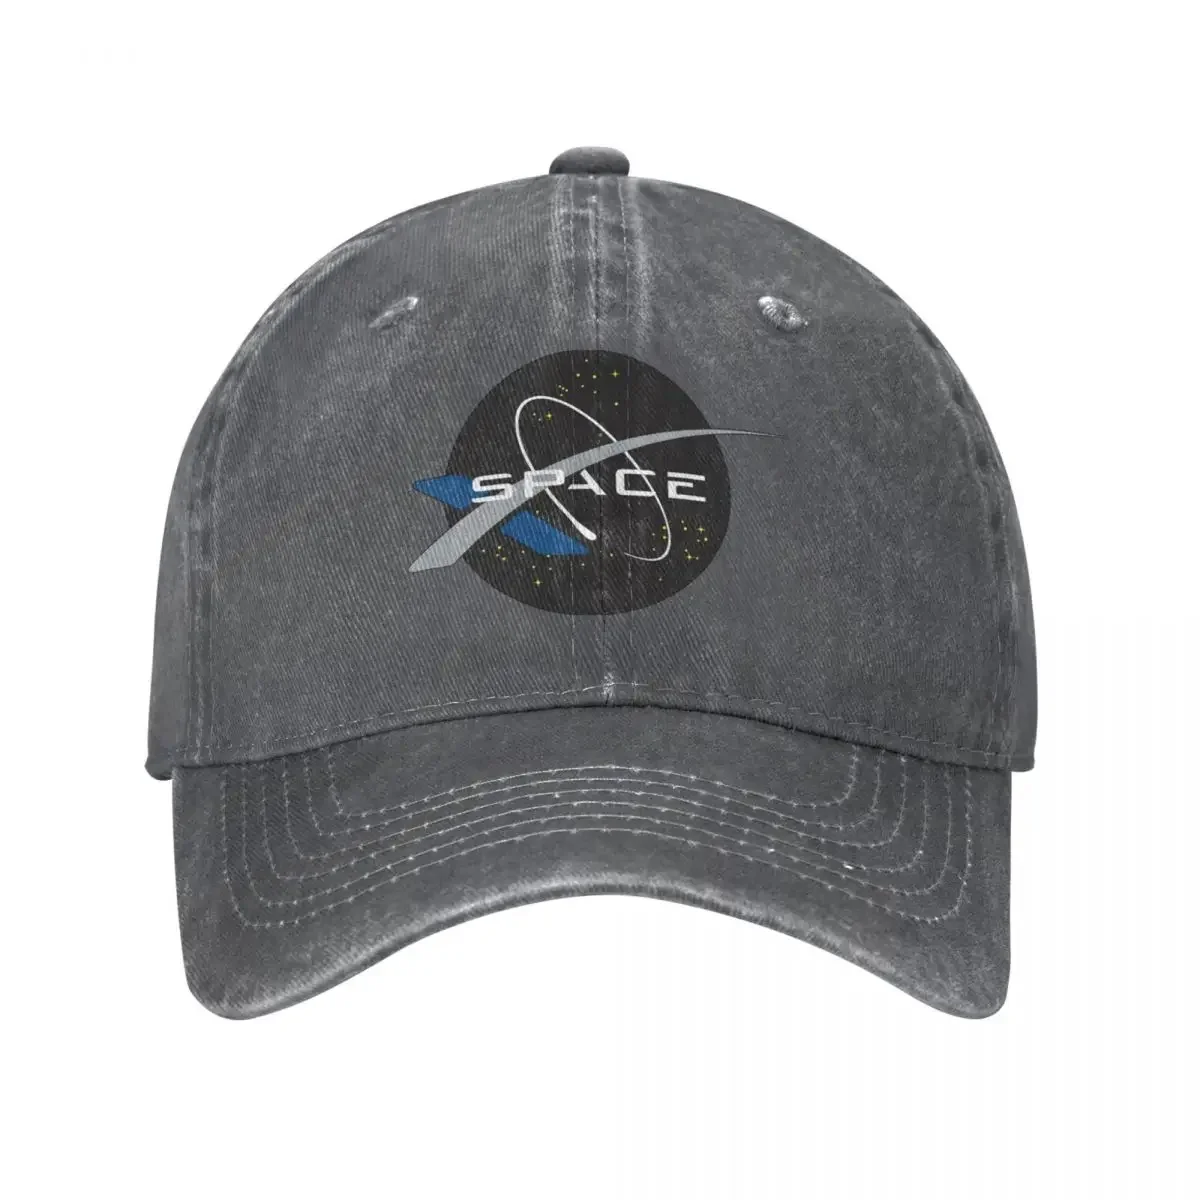 2022 Spacex Space Mars Moon Washed Baseball Cap Snapback Hats For Boy Girl Cap - £6.35 GBP